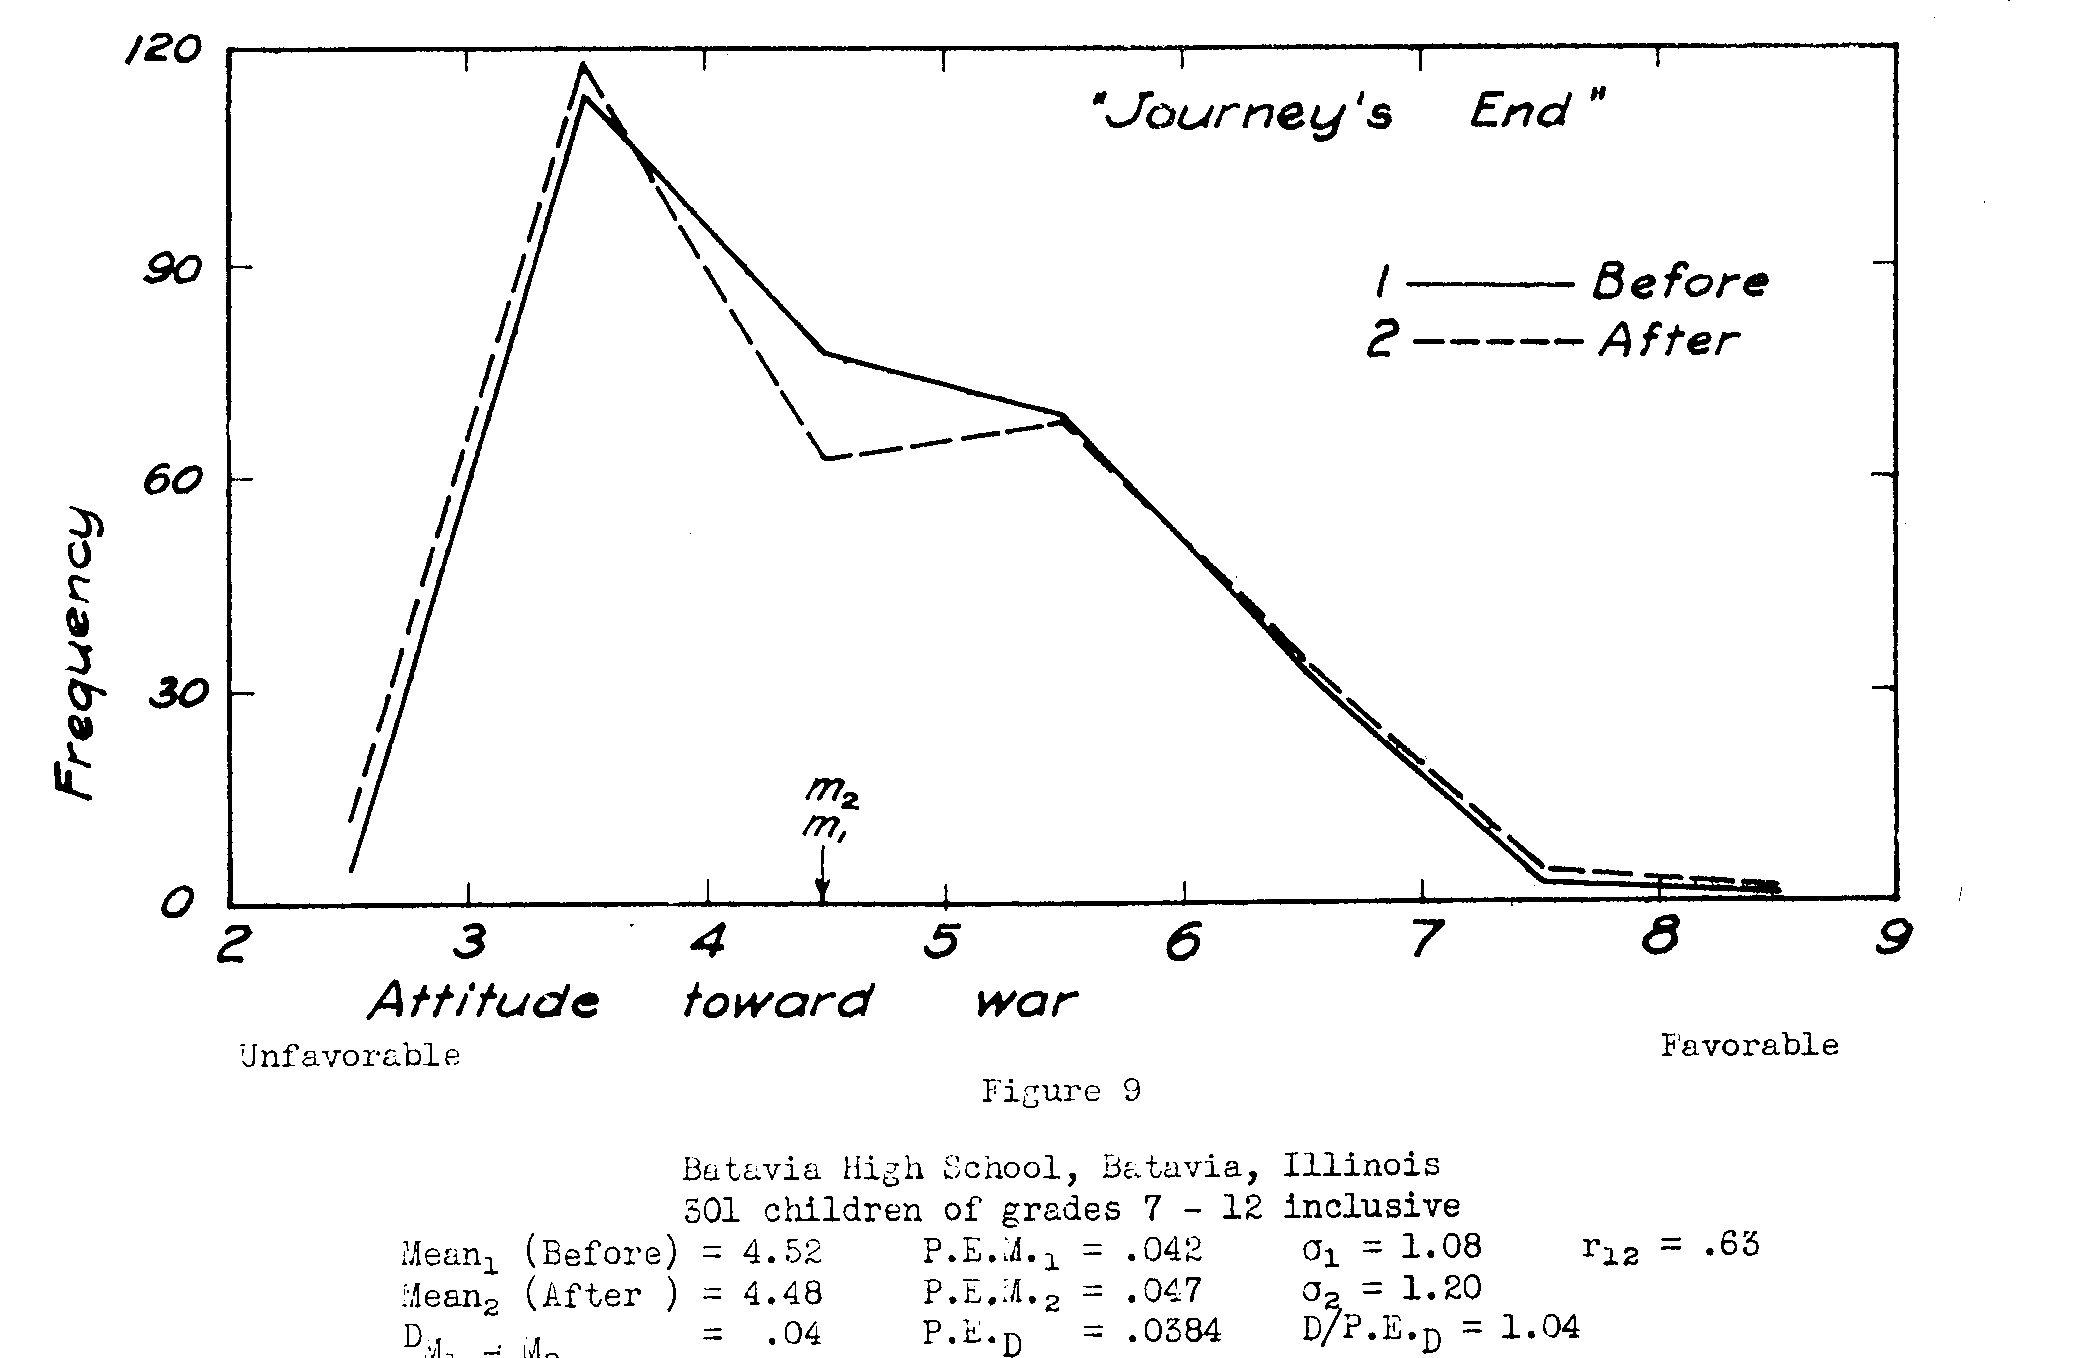 Figure 9, Attitude toward war, before and after JOURNEY'S END